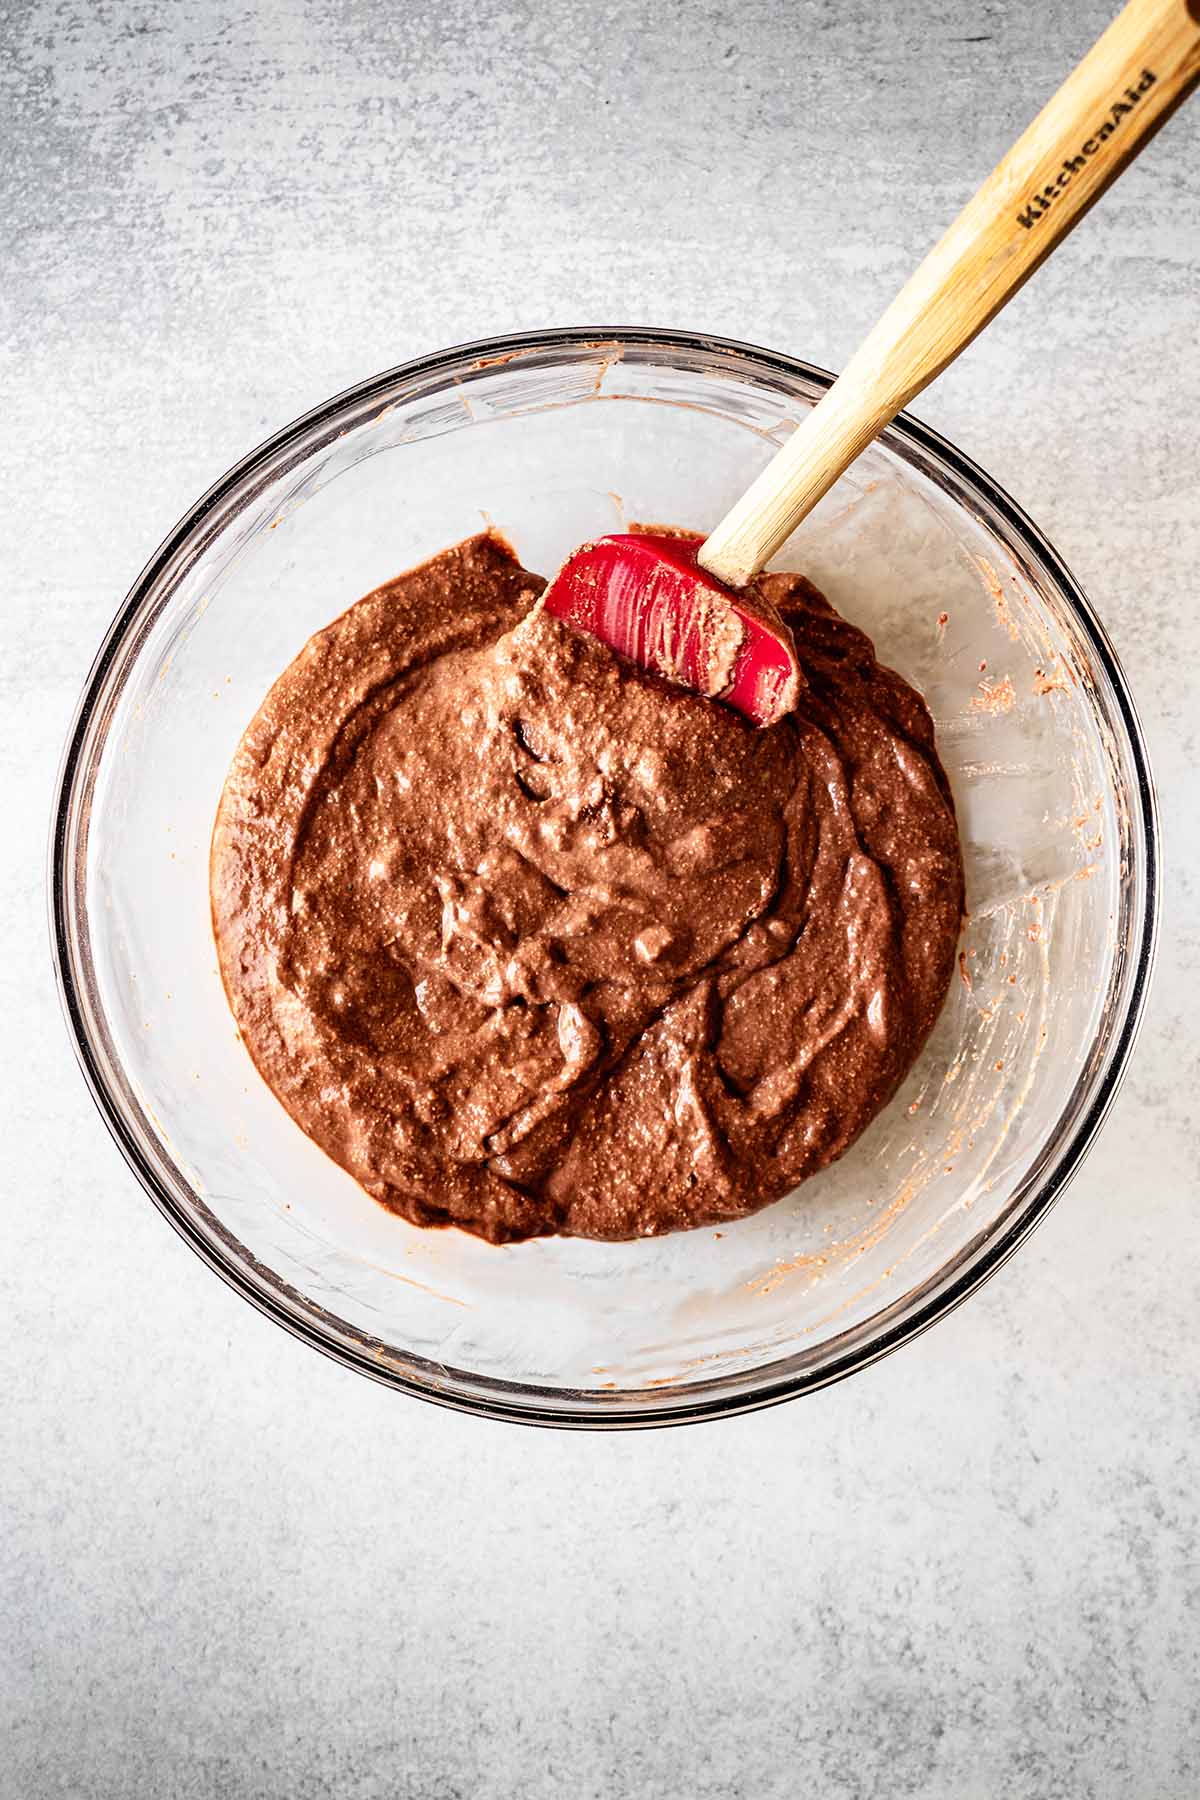 Chocolate protein pancake batter in a large glass bowl.